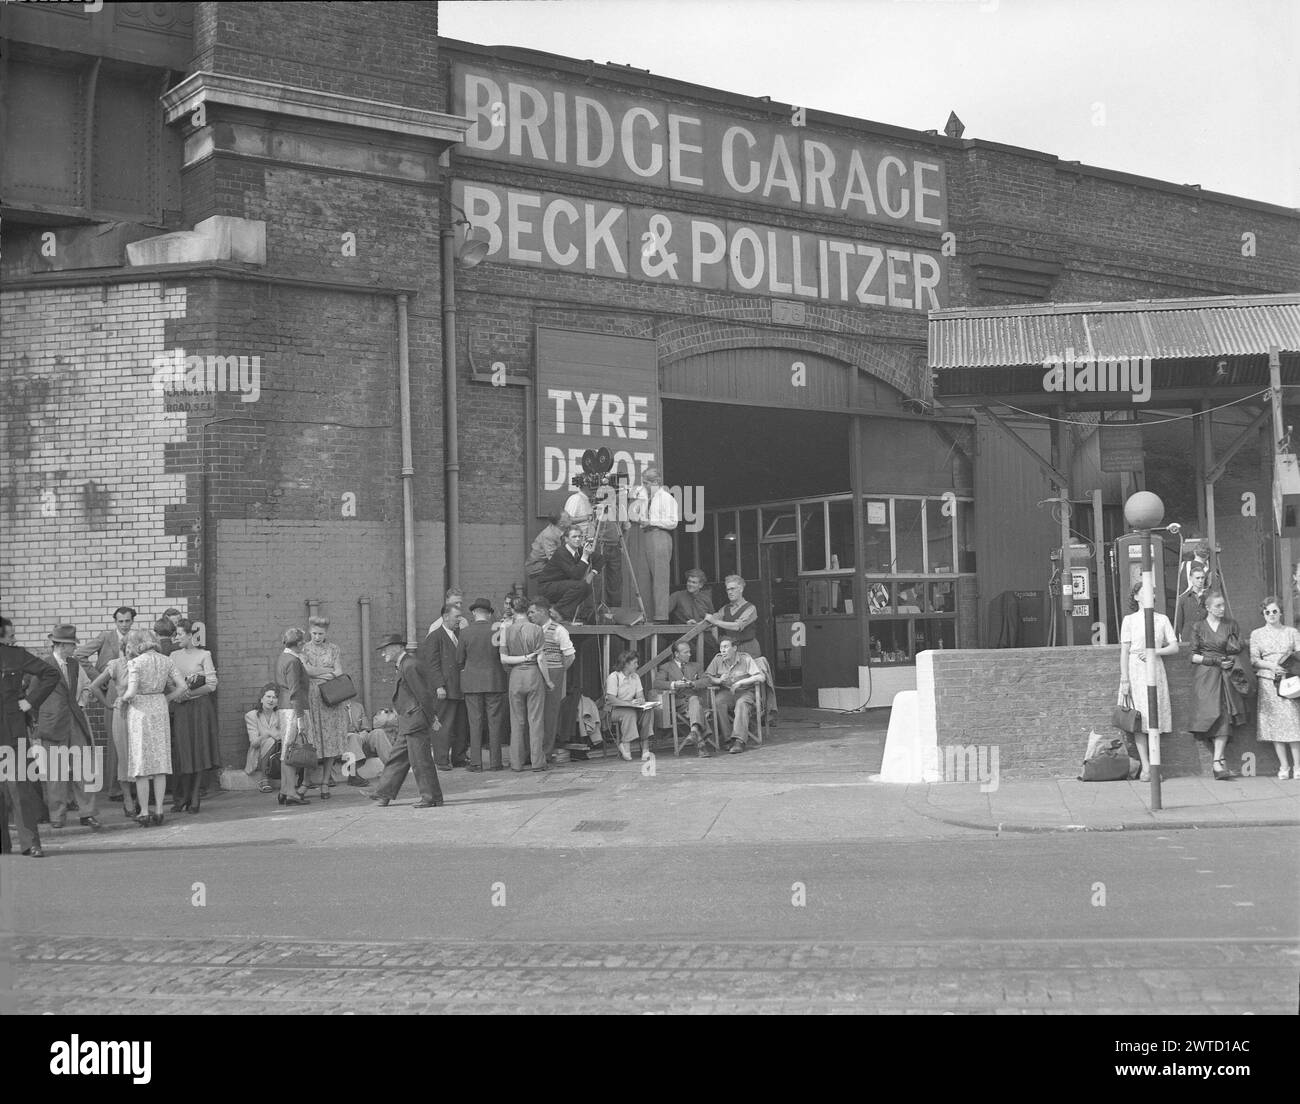 Filming the EALING comedy PASSPORT TO PIMLICO 1949 on location near a large bombsite in Lambeth Director HENRY CORNELIUS  Screenplay T.E.B. CLARKE Music GEORGES AURIC Ealing Studios Stock Photo